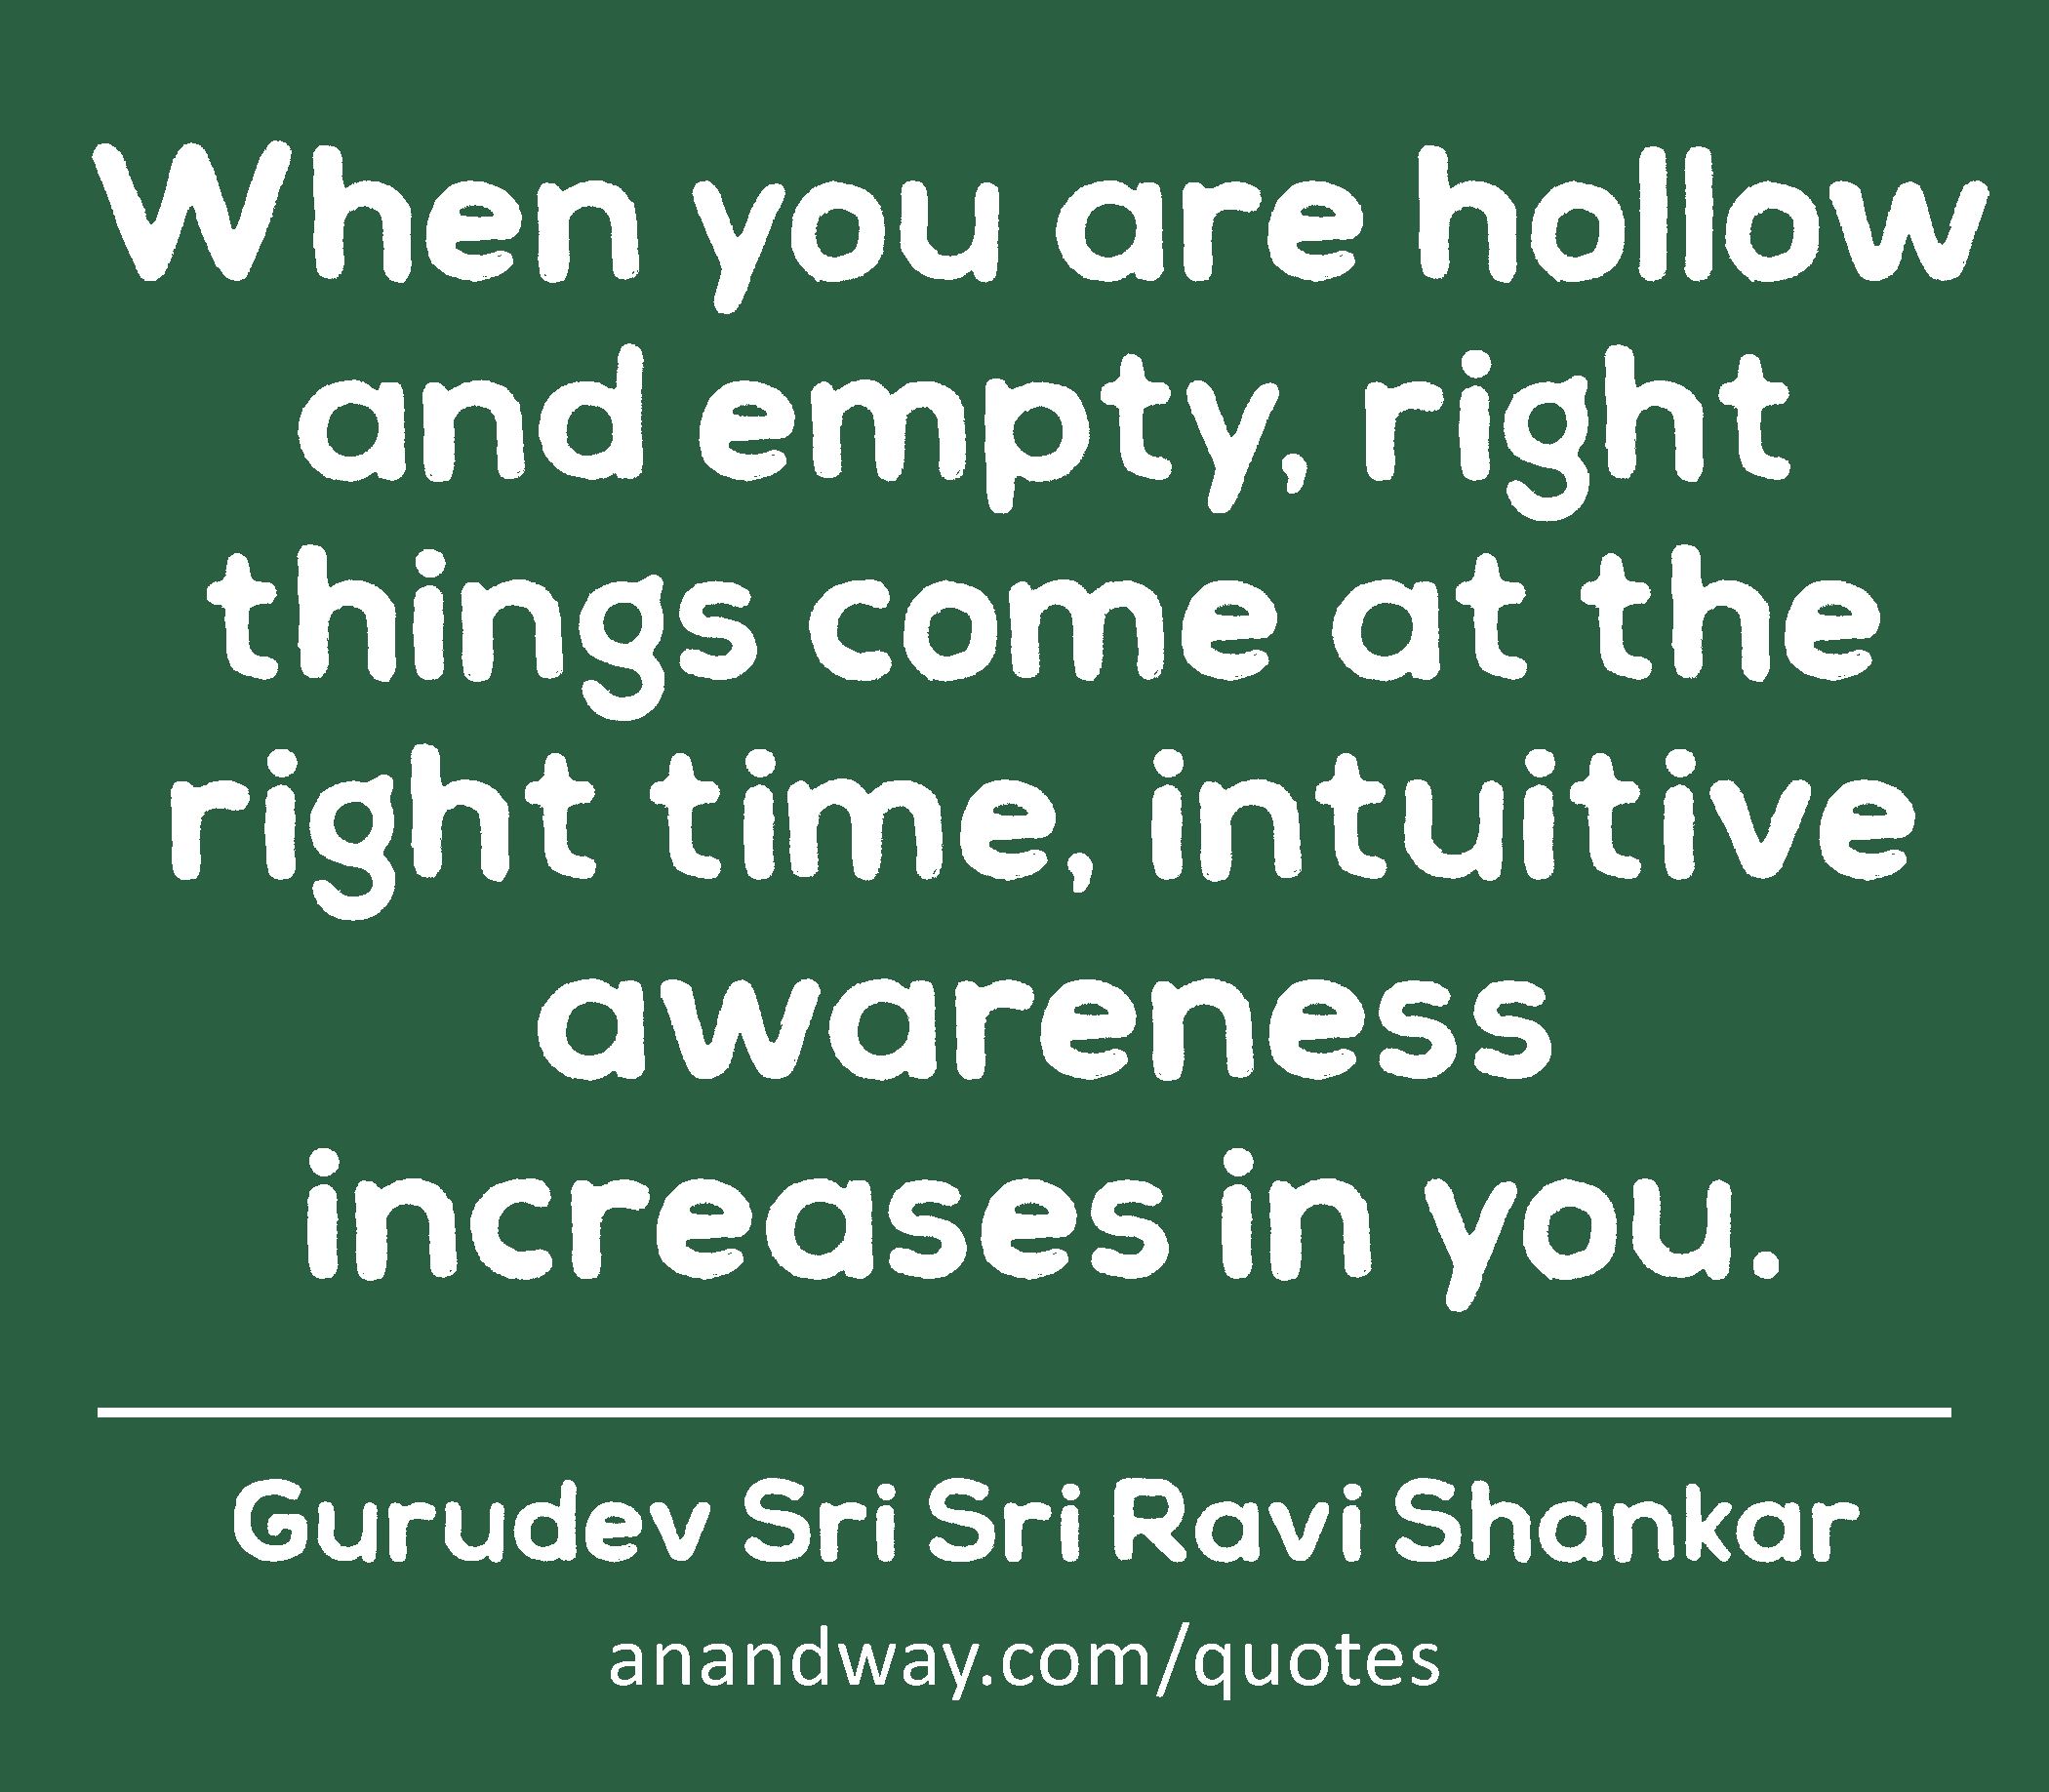 When you are hollow and empty, right things come at the right time, intuitive awareness increases
 -Gurudev Sri Sri Ravi Shankar